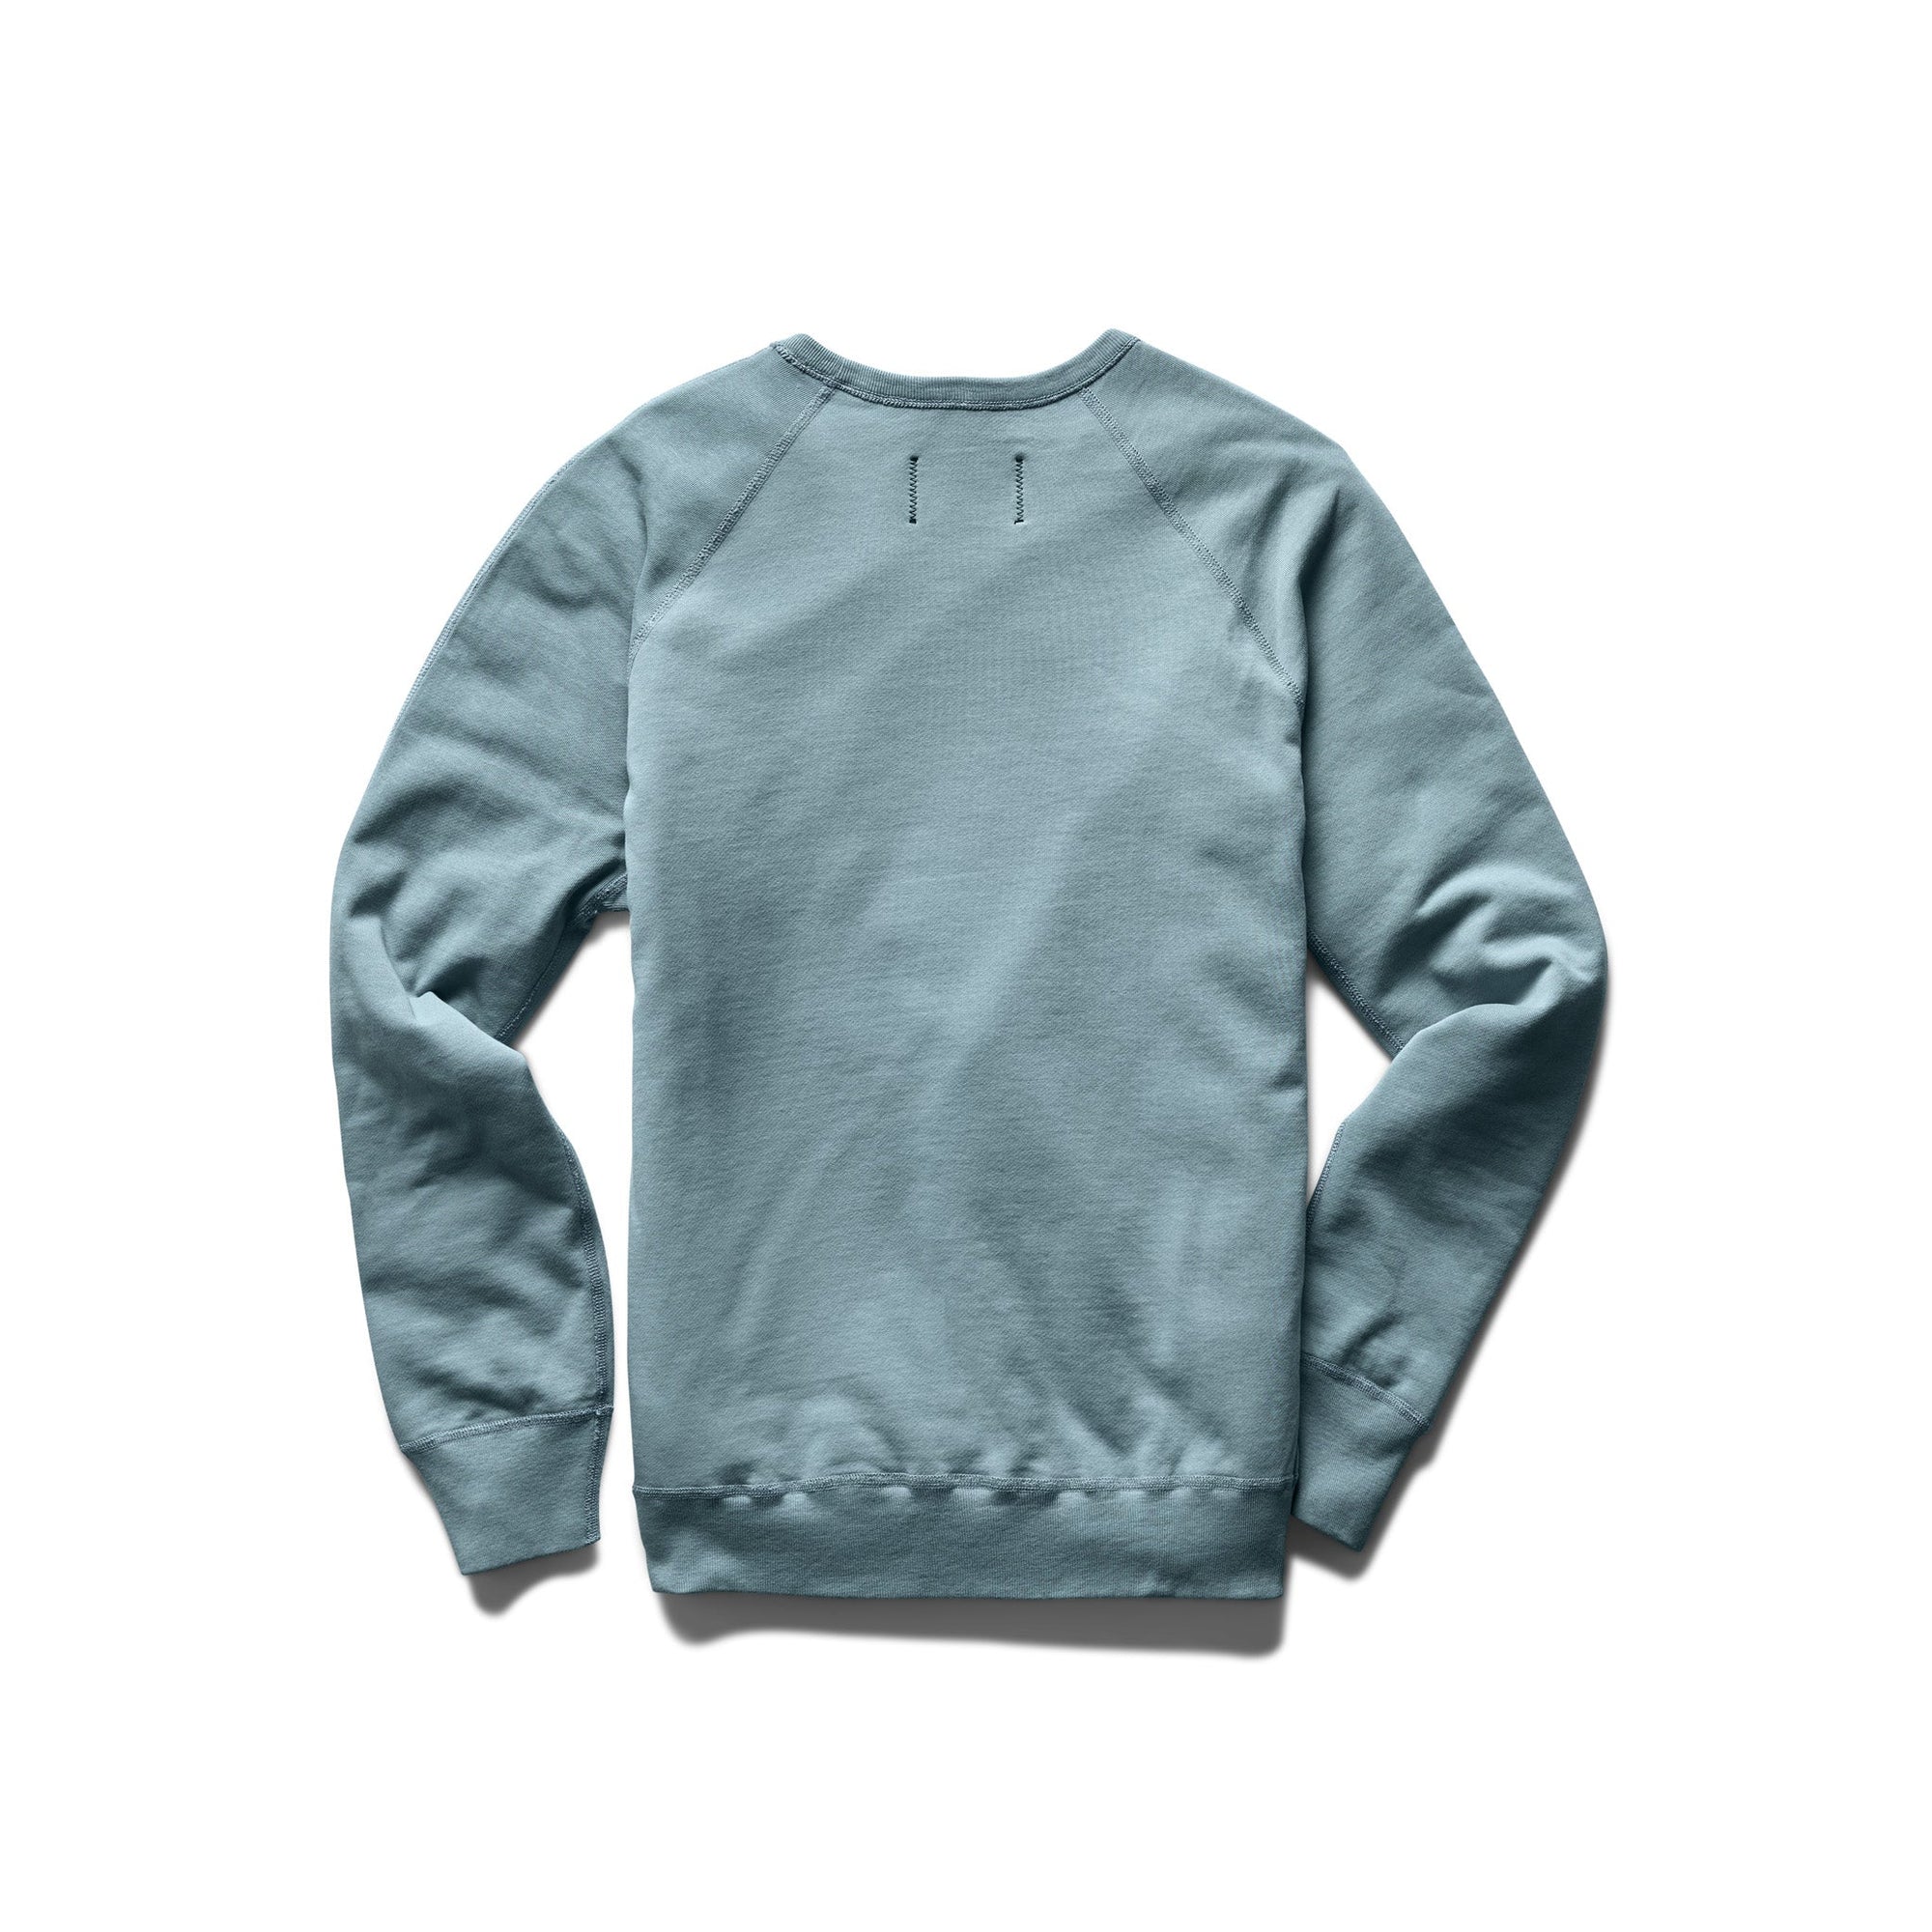 Reigning Champ Lightweight Terry Crewneck in Ink